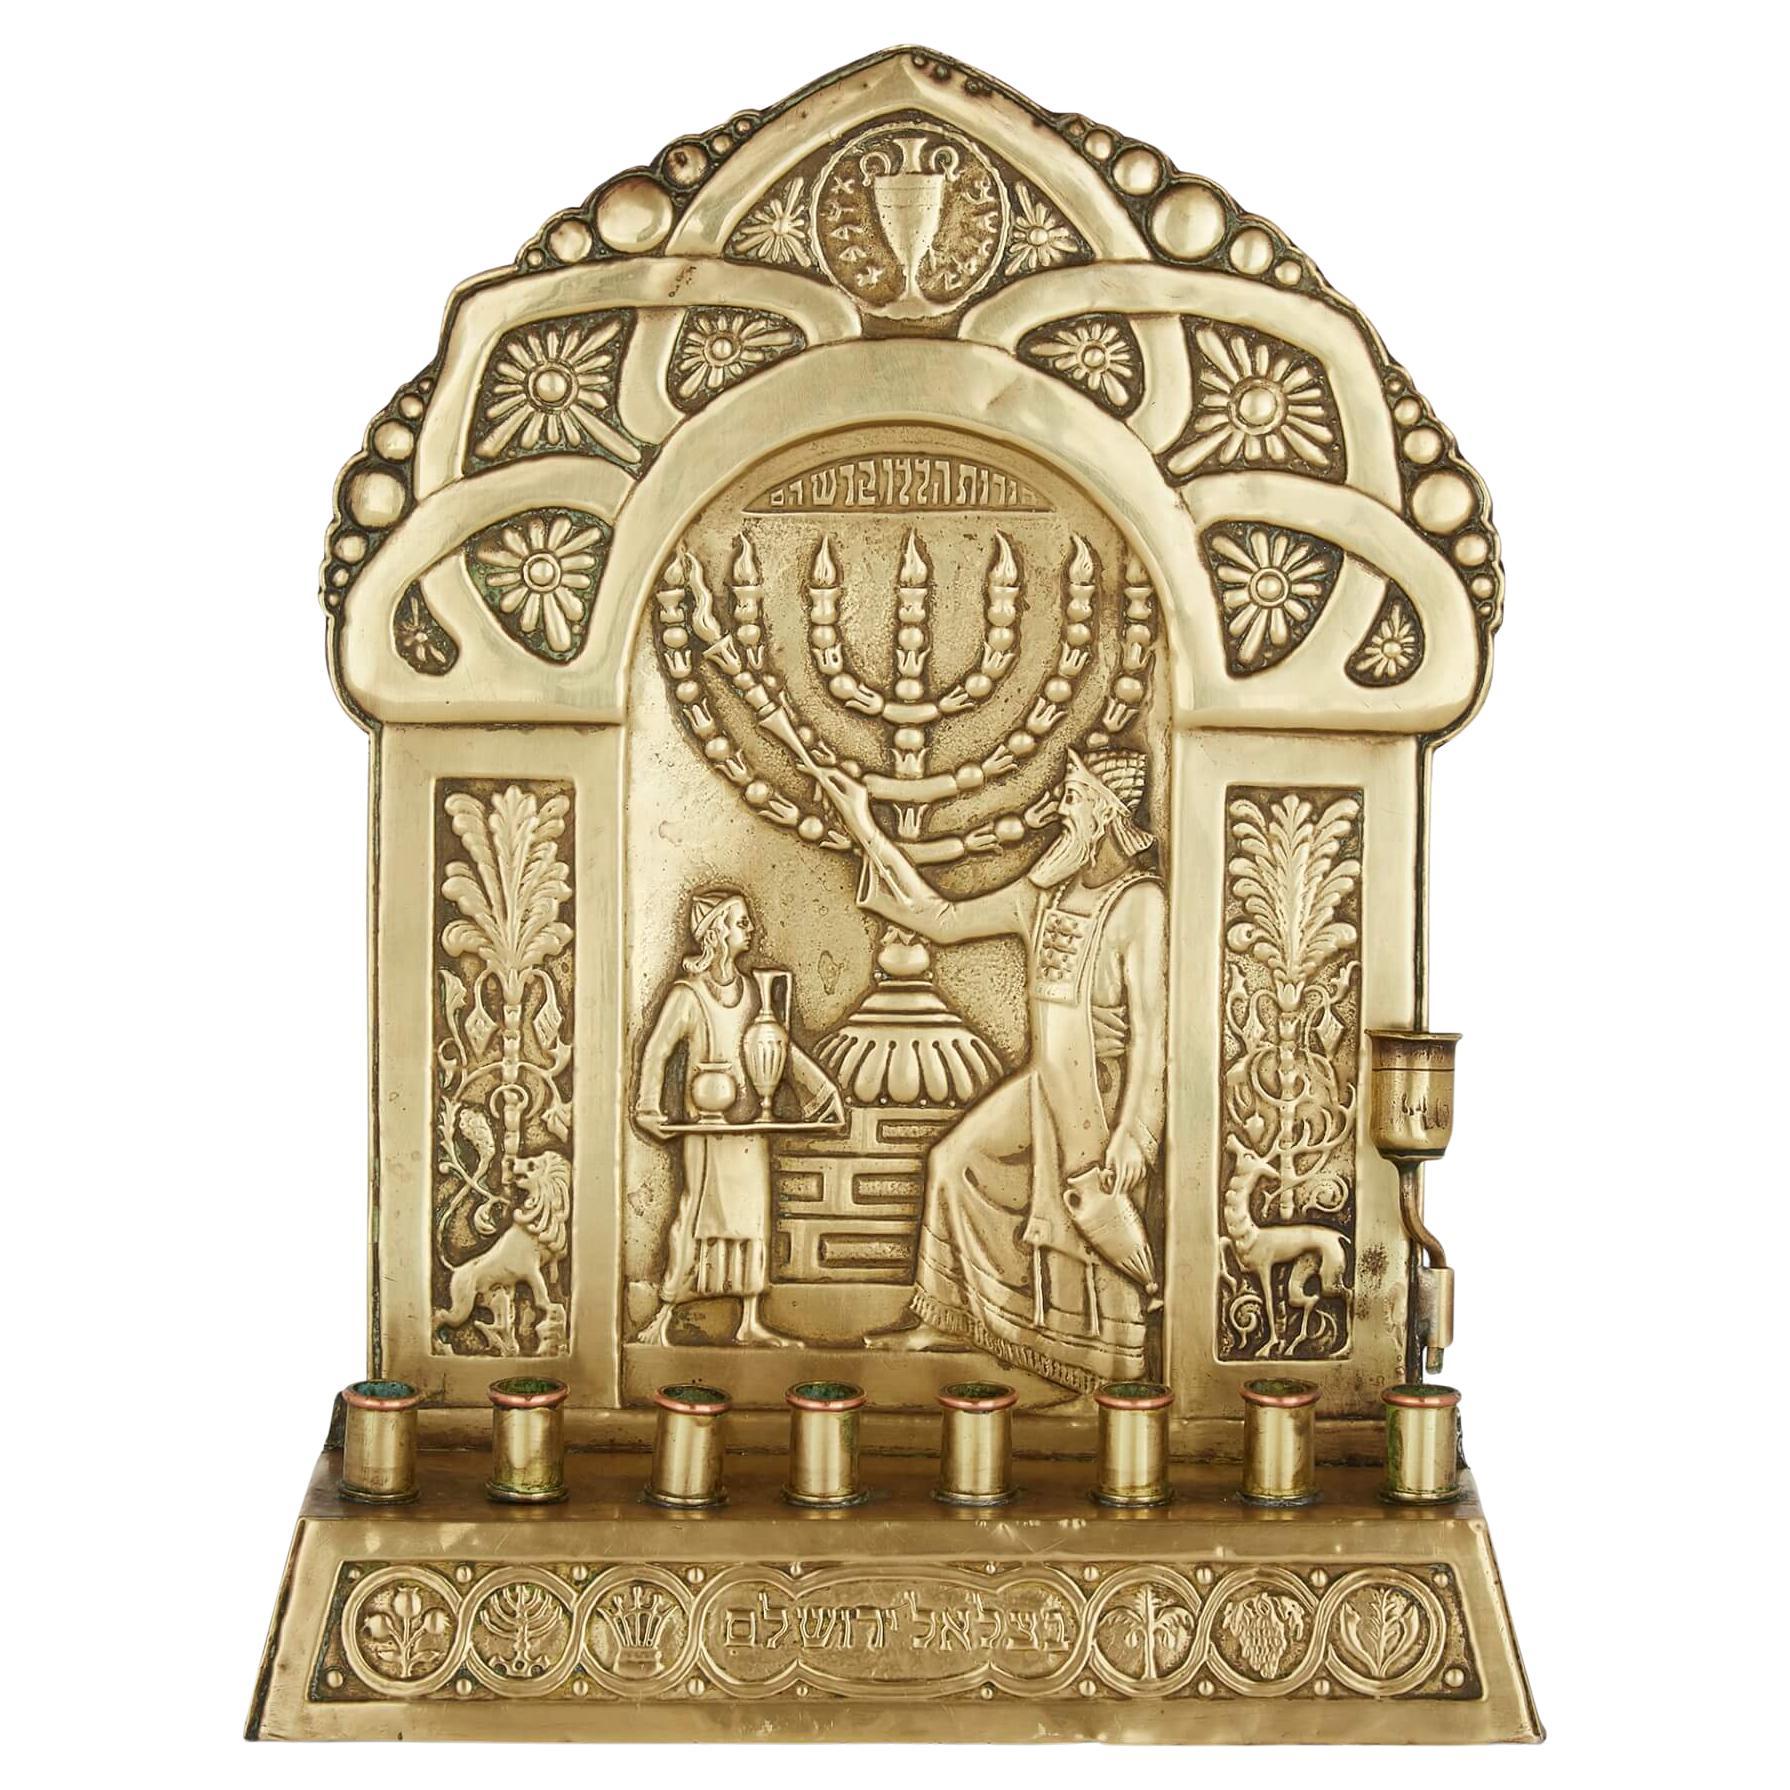 What is the 7 branch menorah?